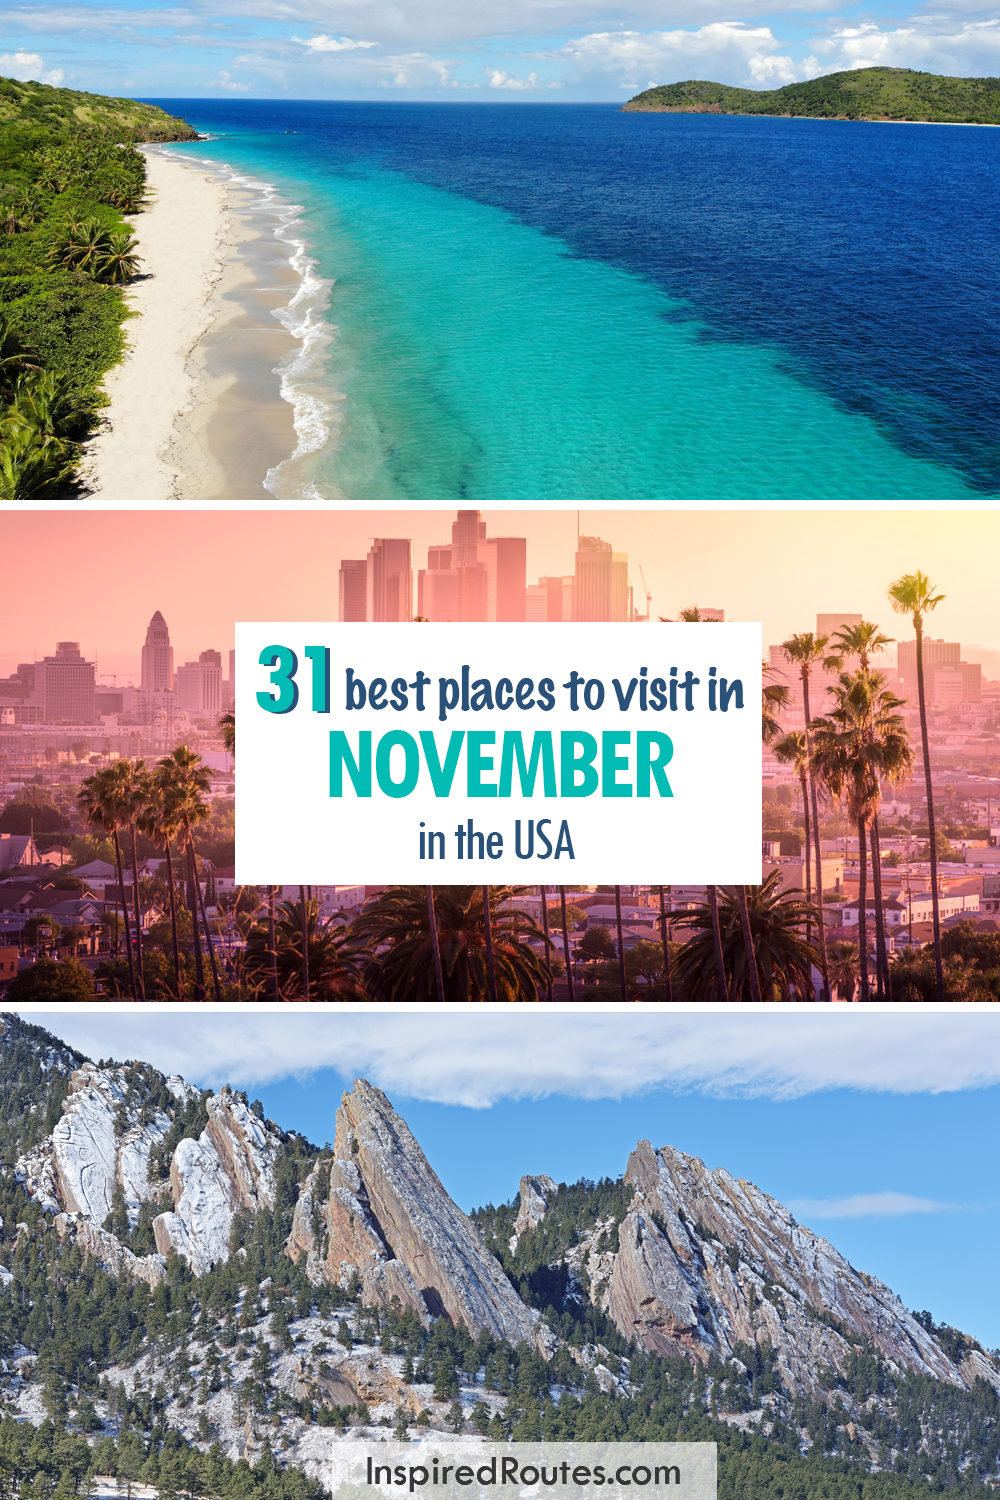 31 best places to visit in November in the USA with photos of the beach a city with palm trees and snowy mountains